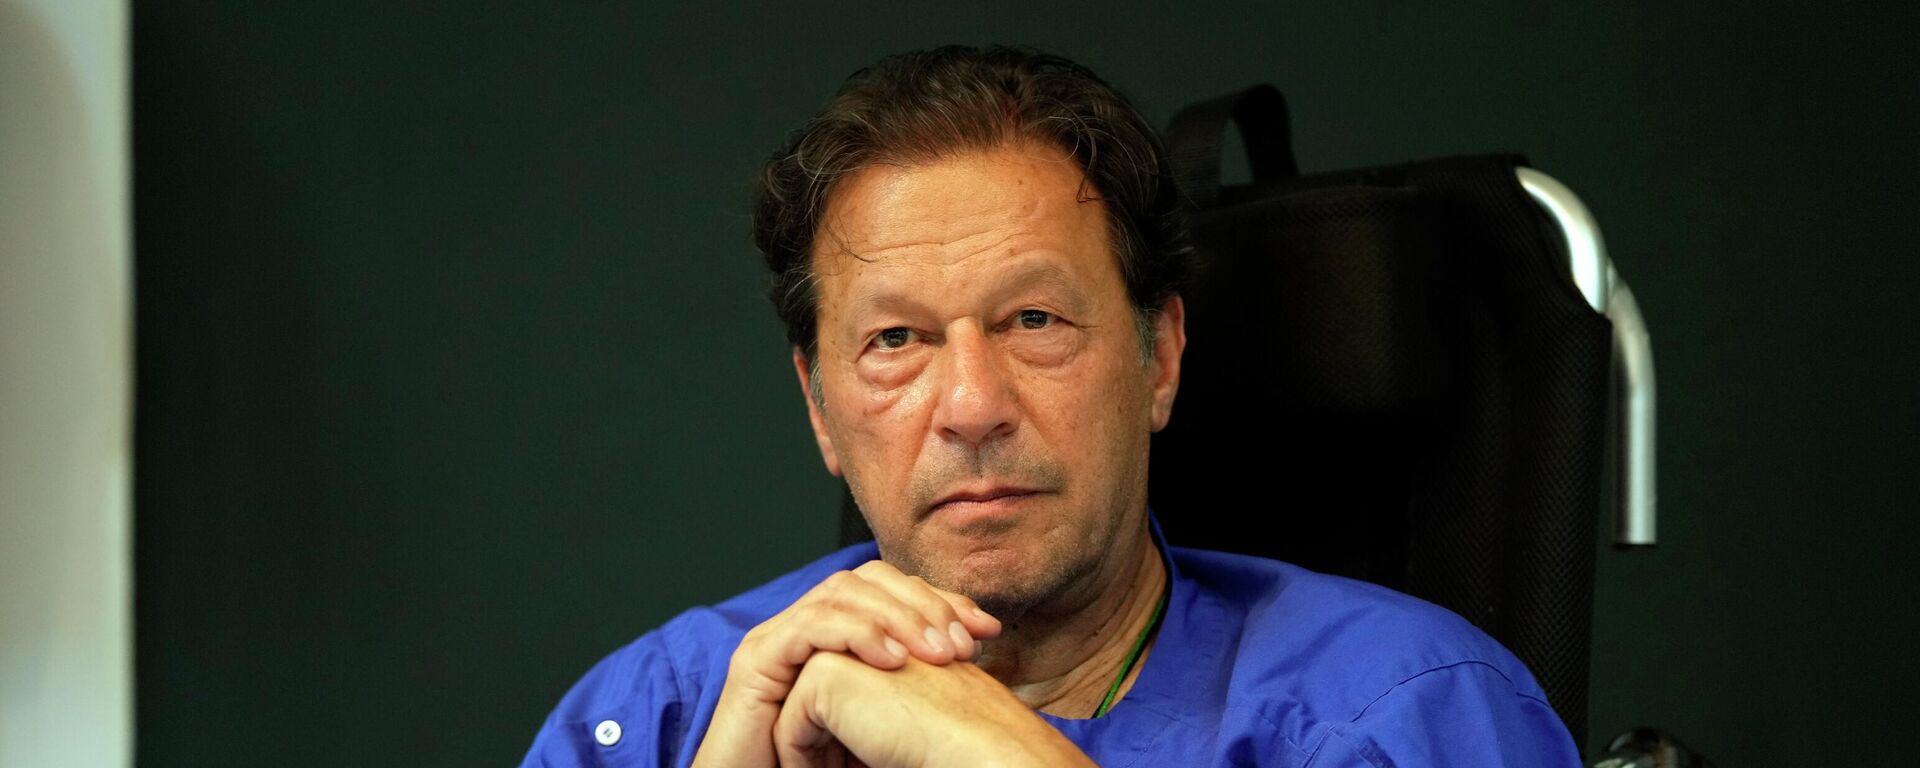 Former Pakistani Prime Minister Imran Khan speaks during a news conference in Shaukat Khanum hospital, where is being treated for a gunshot wound in Lahore, Pakistan, on Nov. 4, 2022. - Sputnik International, 1920, 07.03.2023